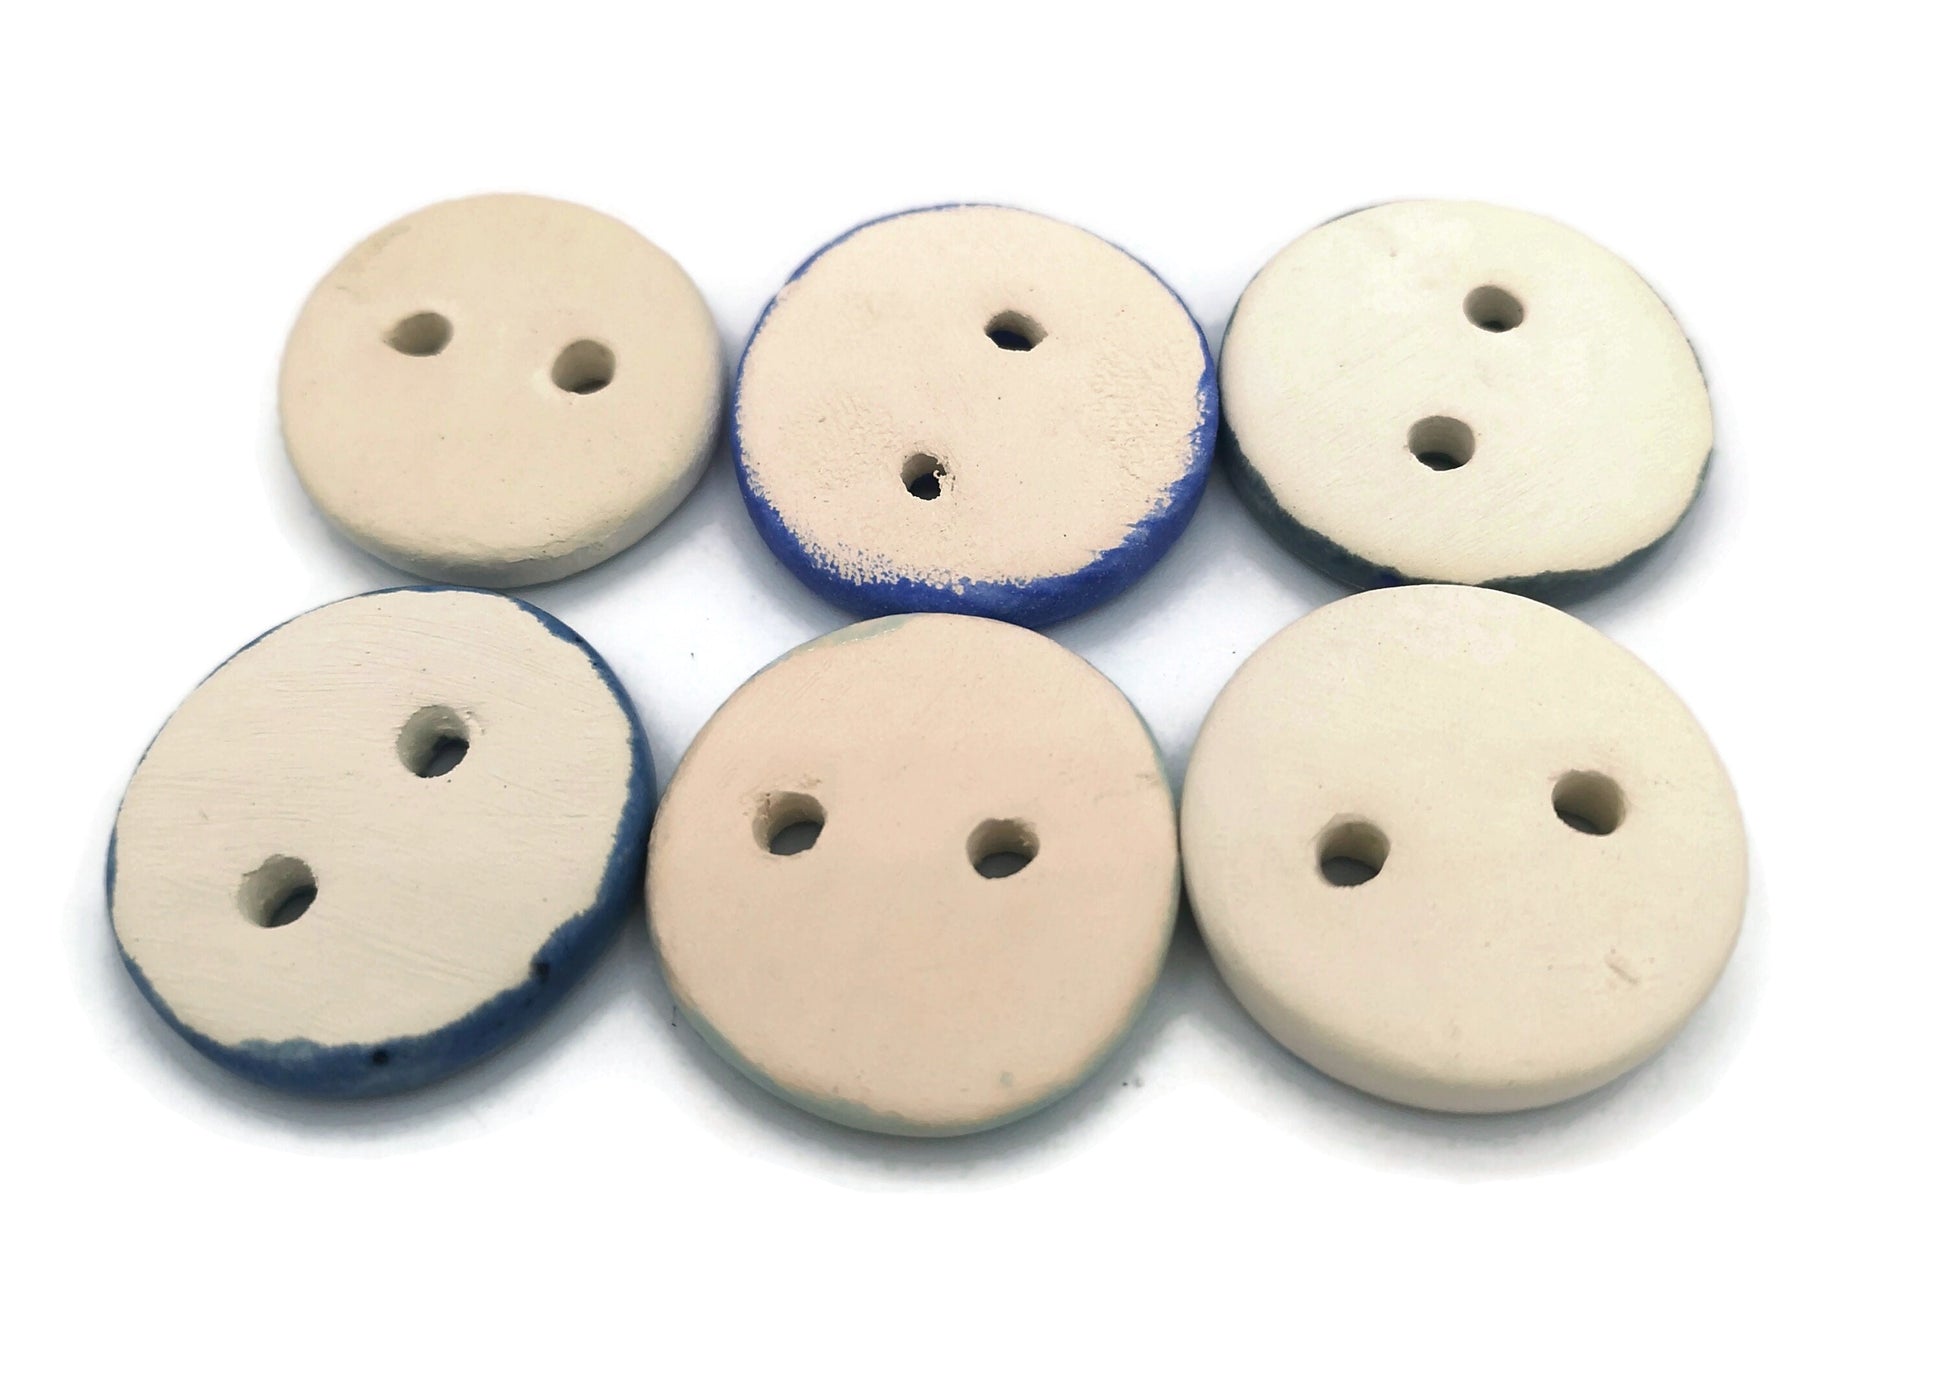 6Pc 30mm Large Round Buttons, Handmade Ceramic Sewing Buttons For Clothing, Craft Buttons For Jackets And Coats - Ceramica Ana Rafael